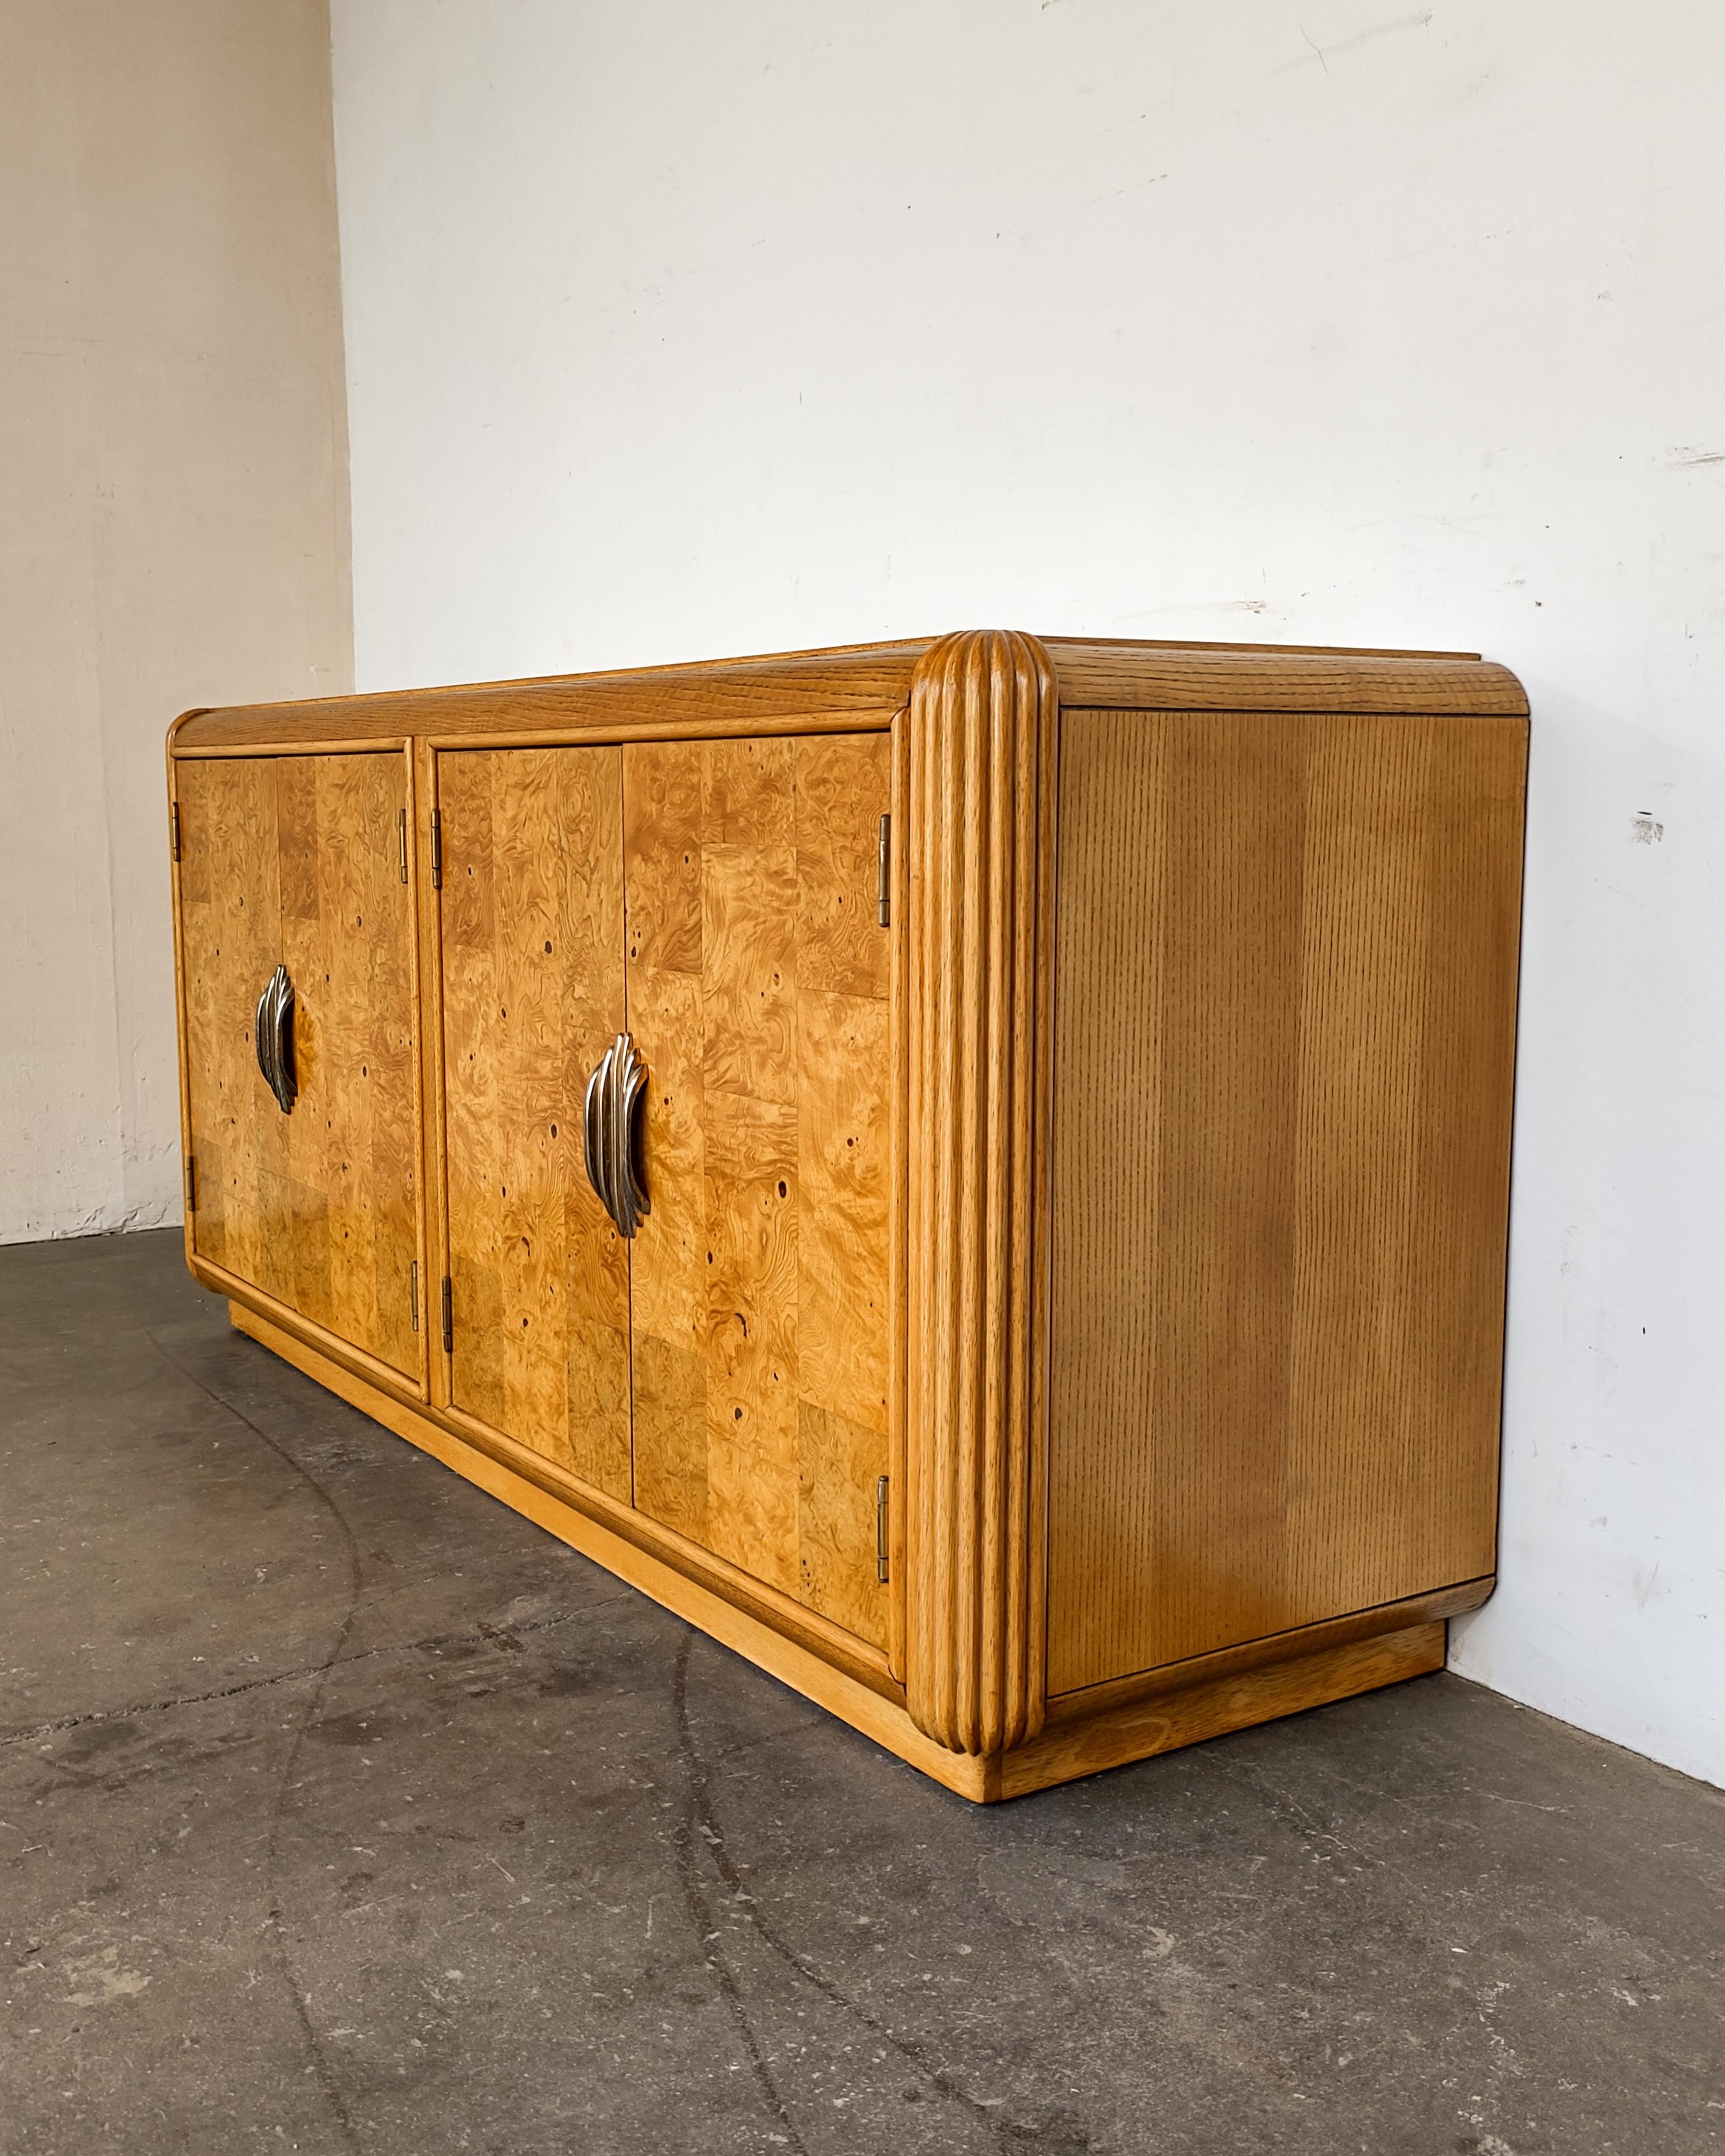 Art Deco revival burl wood and oak credenza circa 1980s. Completely refinished to show beautiful wood grain, rounded fluted corners and patchwork burl doors. Unique original patinaed brass pulls. Interior features drawer and removable shelf on each